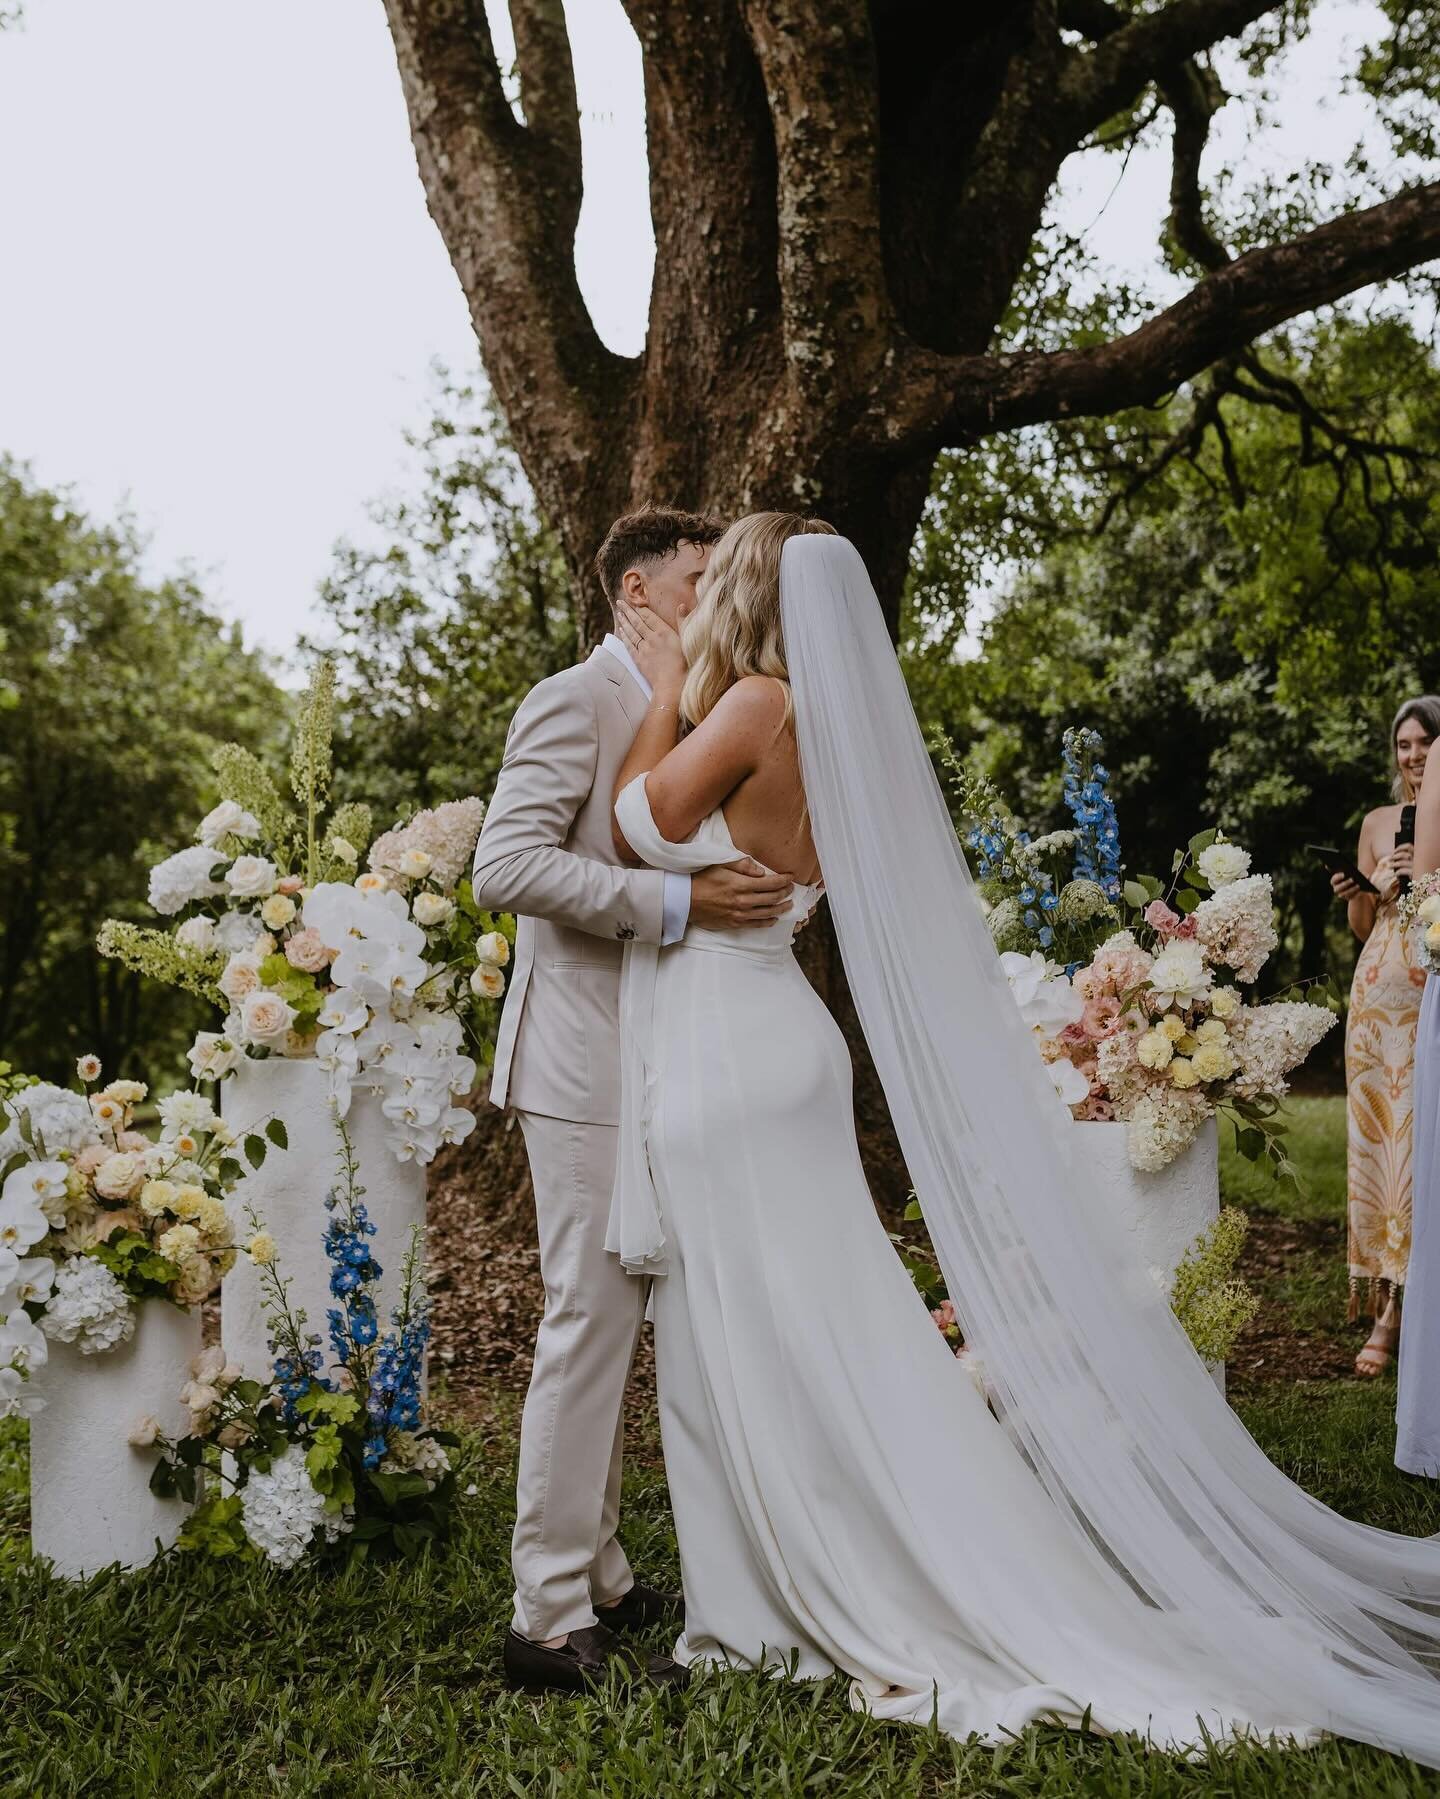 Madi &amp; Cam&rsquo;s wedding at The Orchard Estate was pure magic! 

From the charming ceremony under the trees to their heartfelt vows, it was clear that Madi &amp; Cam&rsquo;s love story was something special. 

Can we just take a moment to appre